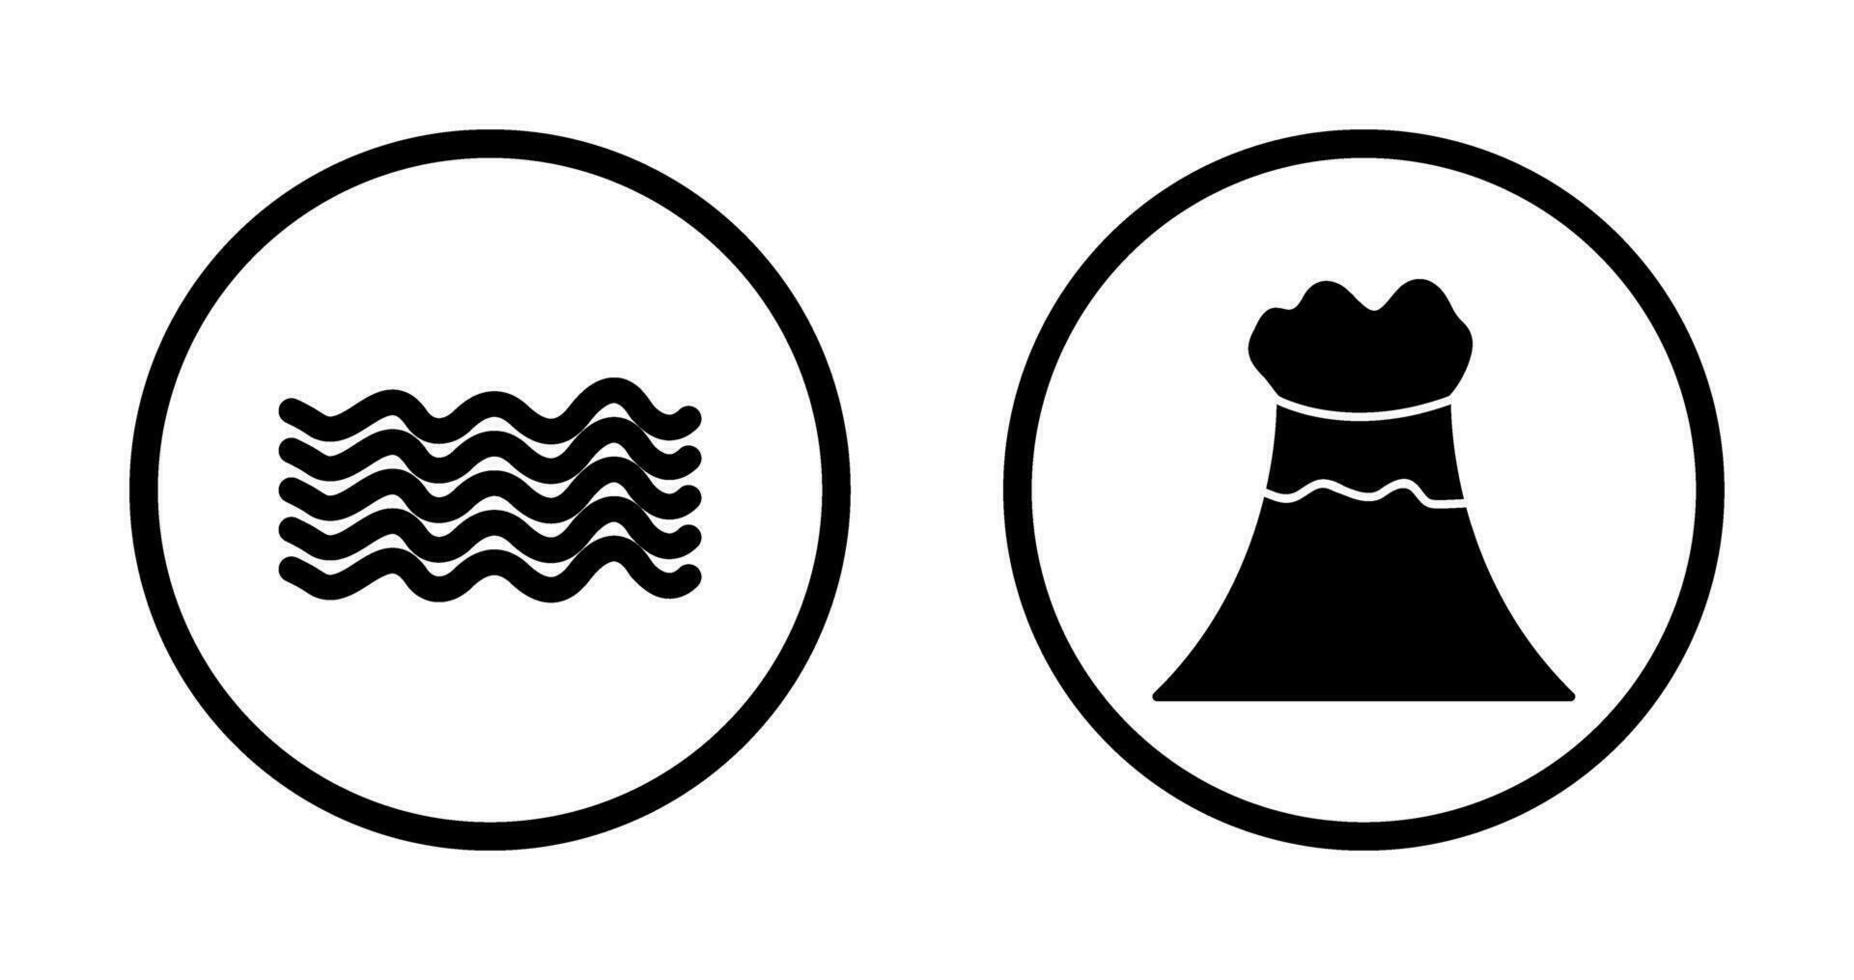 magnetic waves and volcano Icon vector